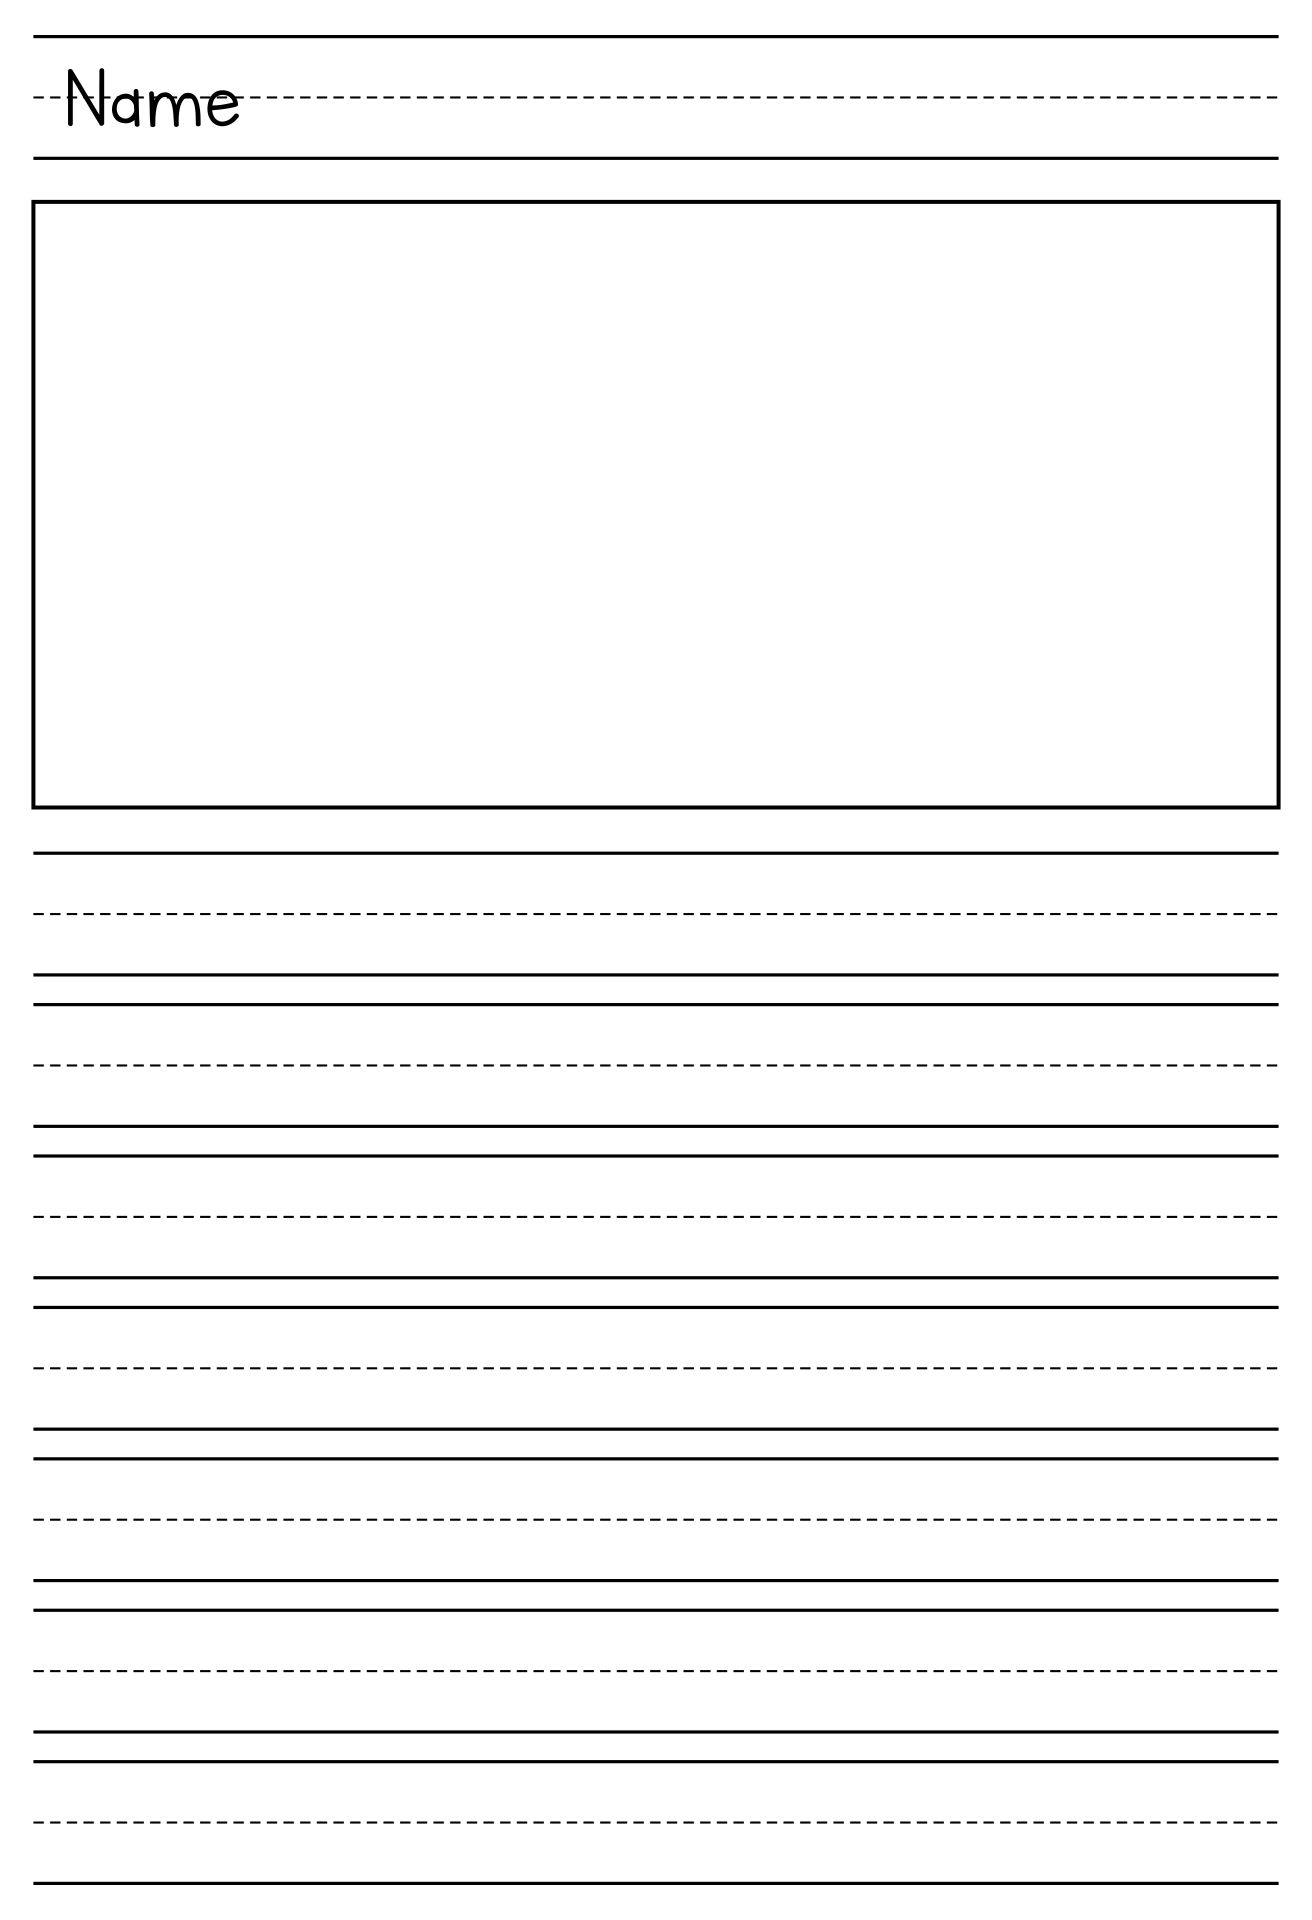 Free Printable Primary Paper Template Lined Paper For Kindergarten 